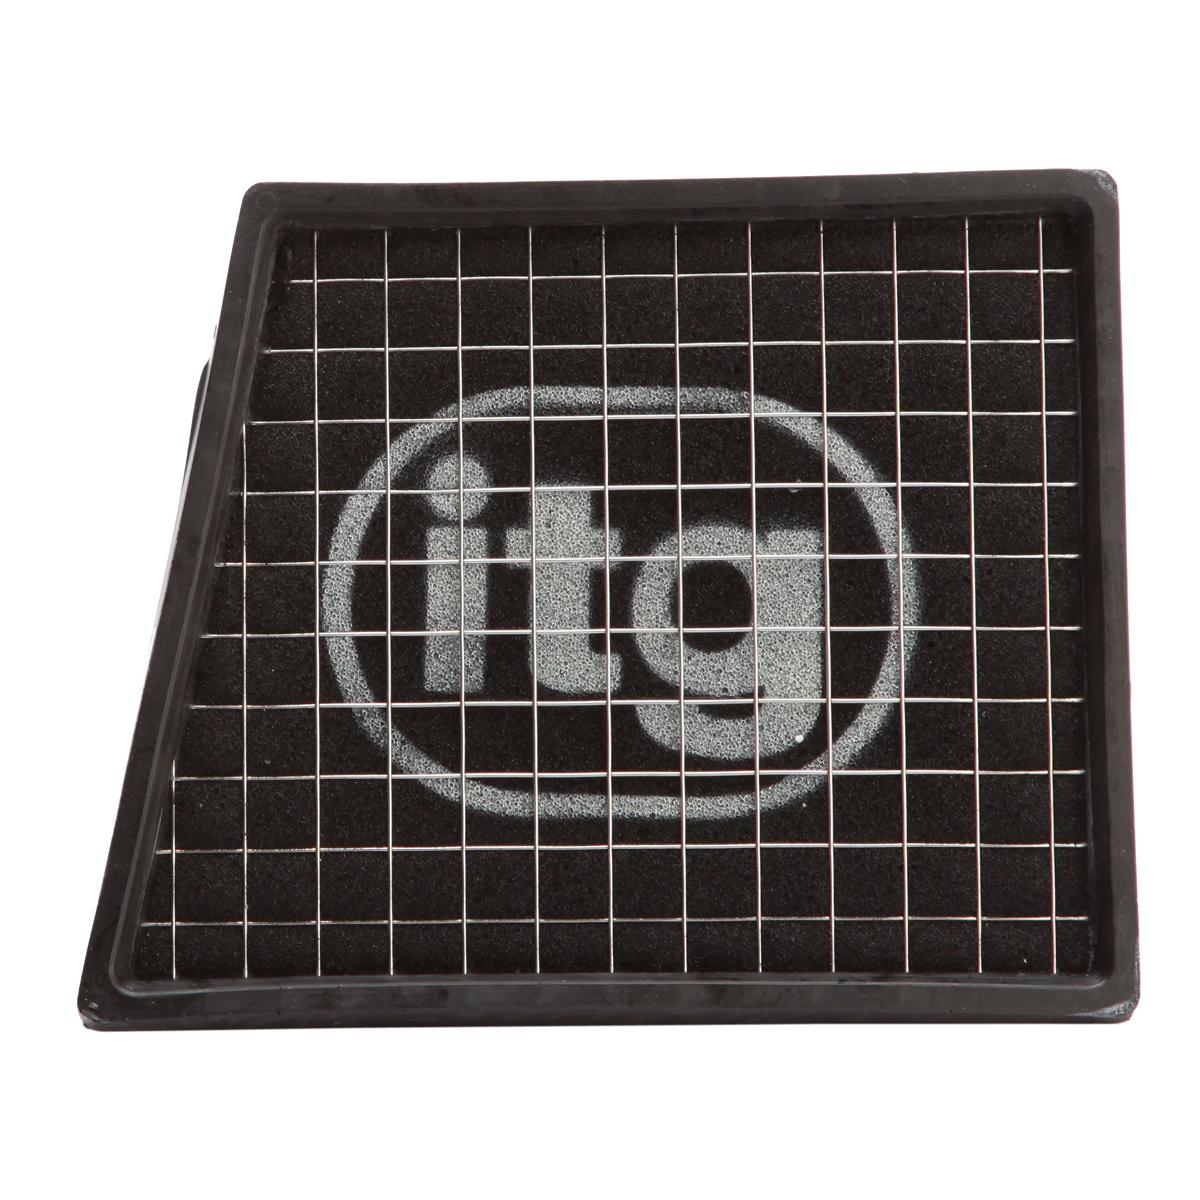 ITG Air Filter For Ford Fiesta V 1.25 (05/02>), 1.3, 1.4, 1.6 (03/02>)